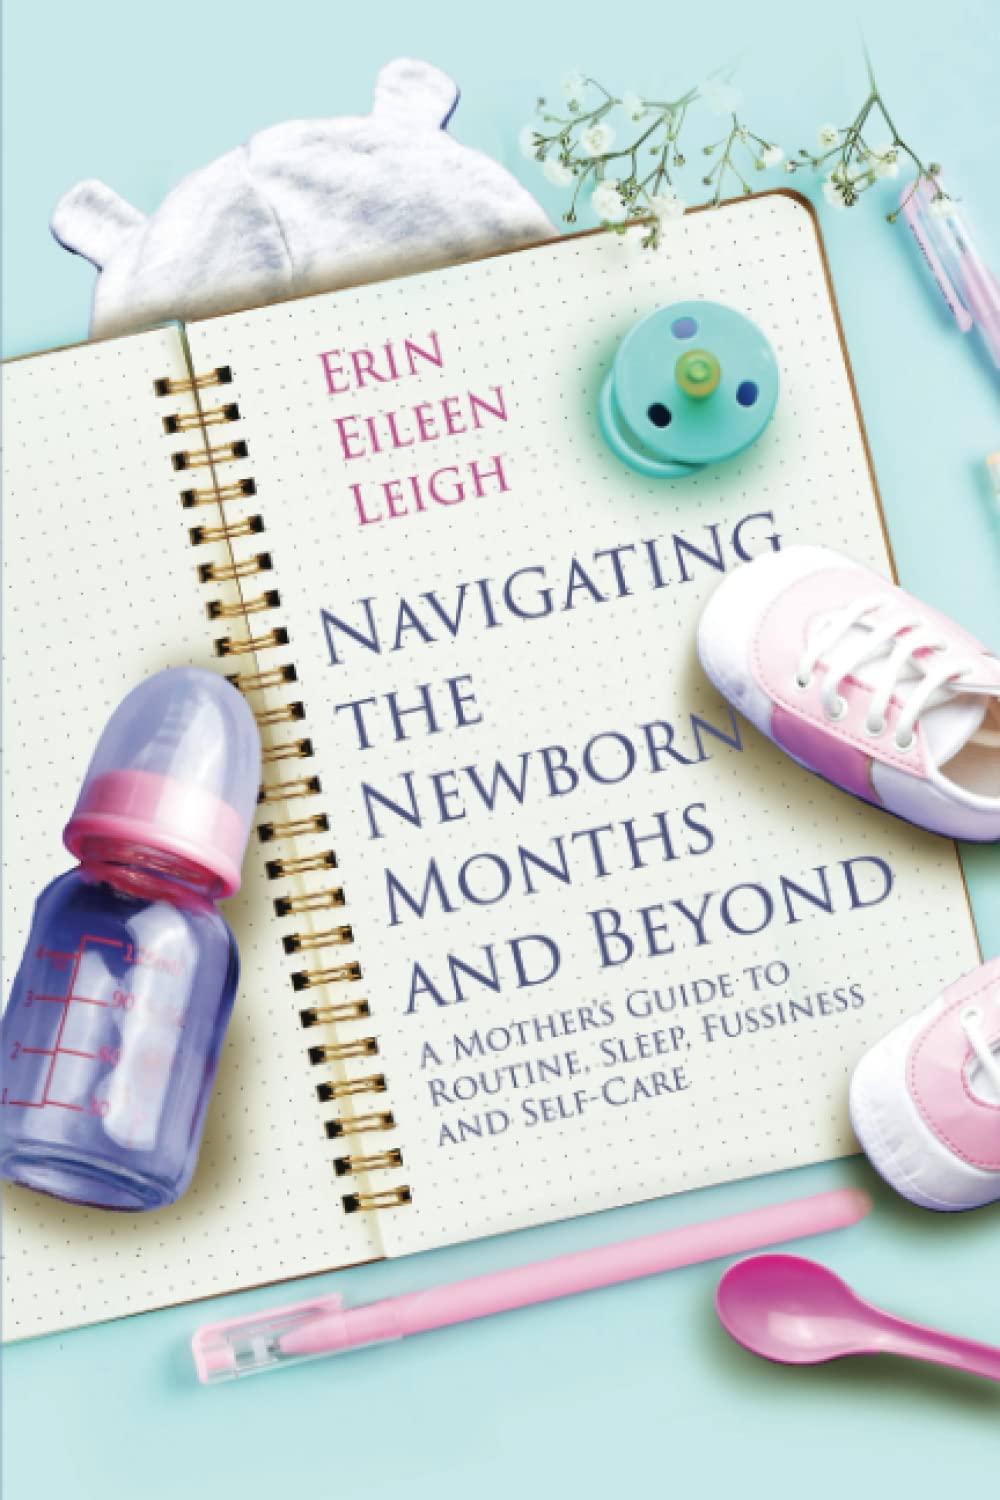 Erin Eileen Leigh Navigating the Newborn Months and Beyond: A Mother's Guide to Routine, Sleep, Fussiness and Self-Care - Two Little Birds Boutique